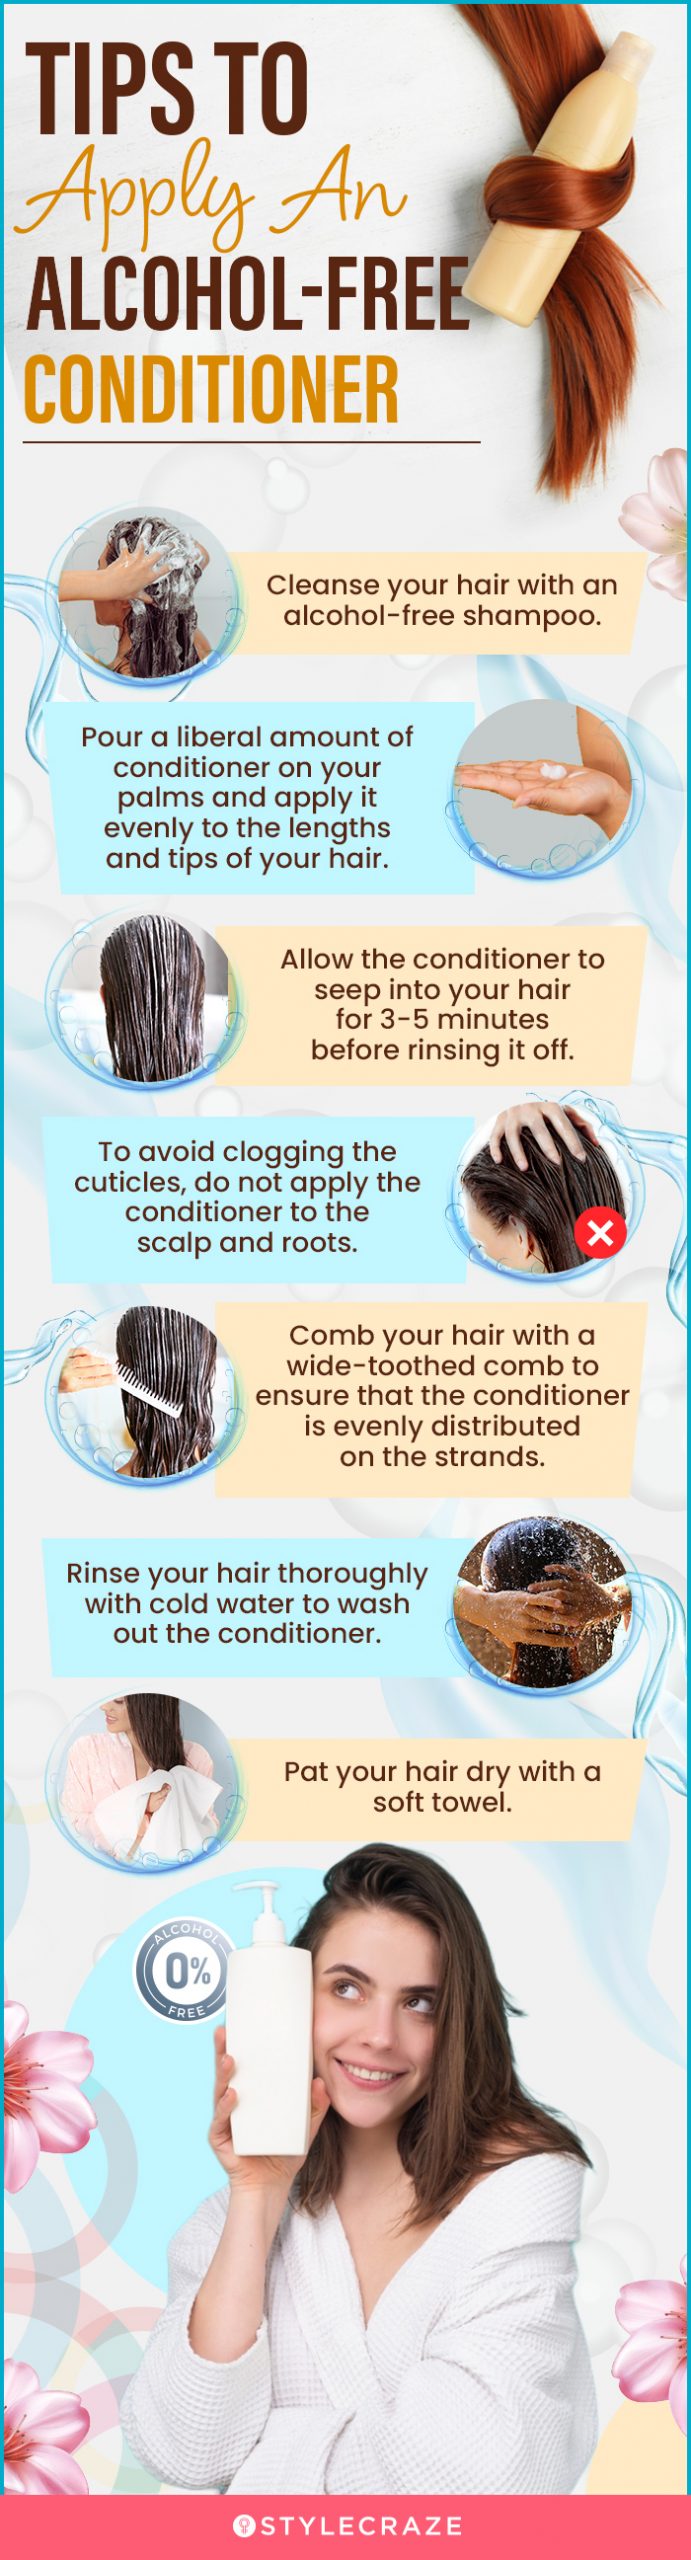 Tip To Apply An Alcohol-Free Conditioner (infographic)